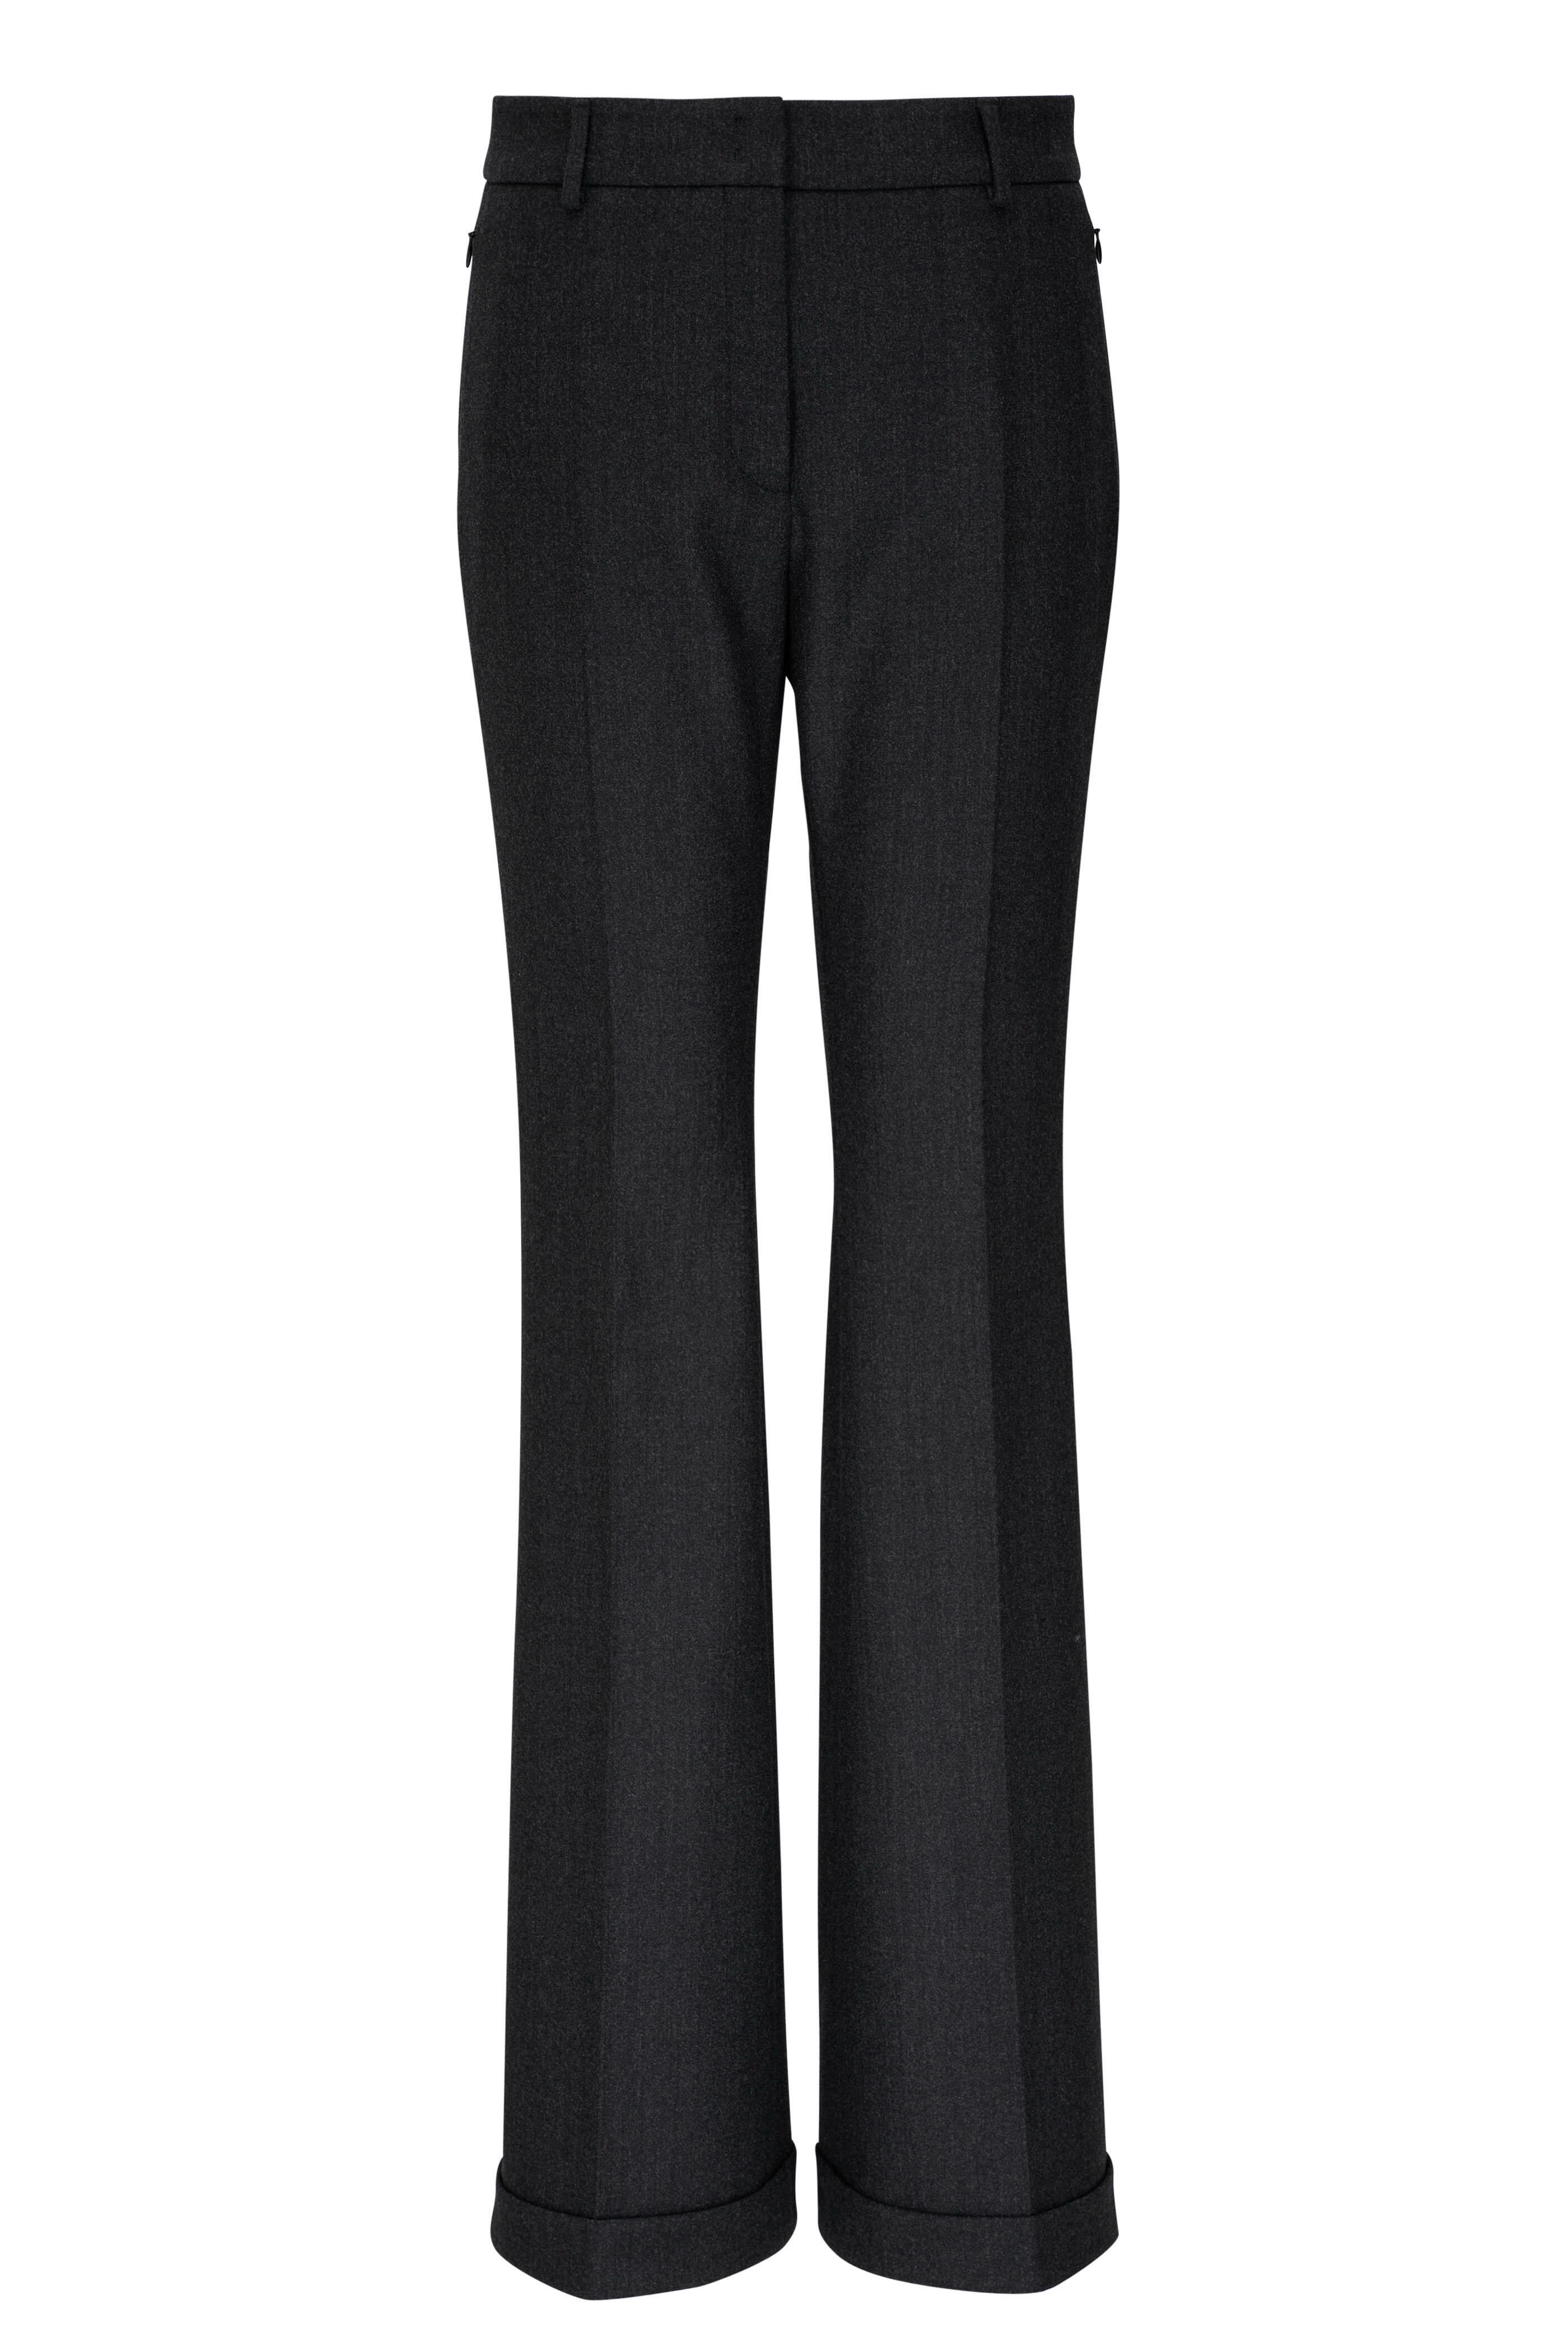 Akris - Marisa Charcoal Gray Double Faced Wool Pant